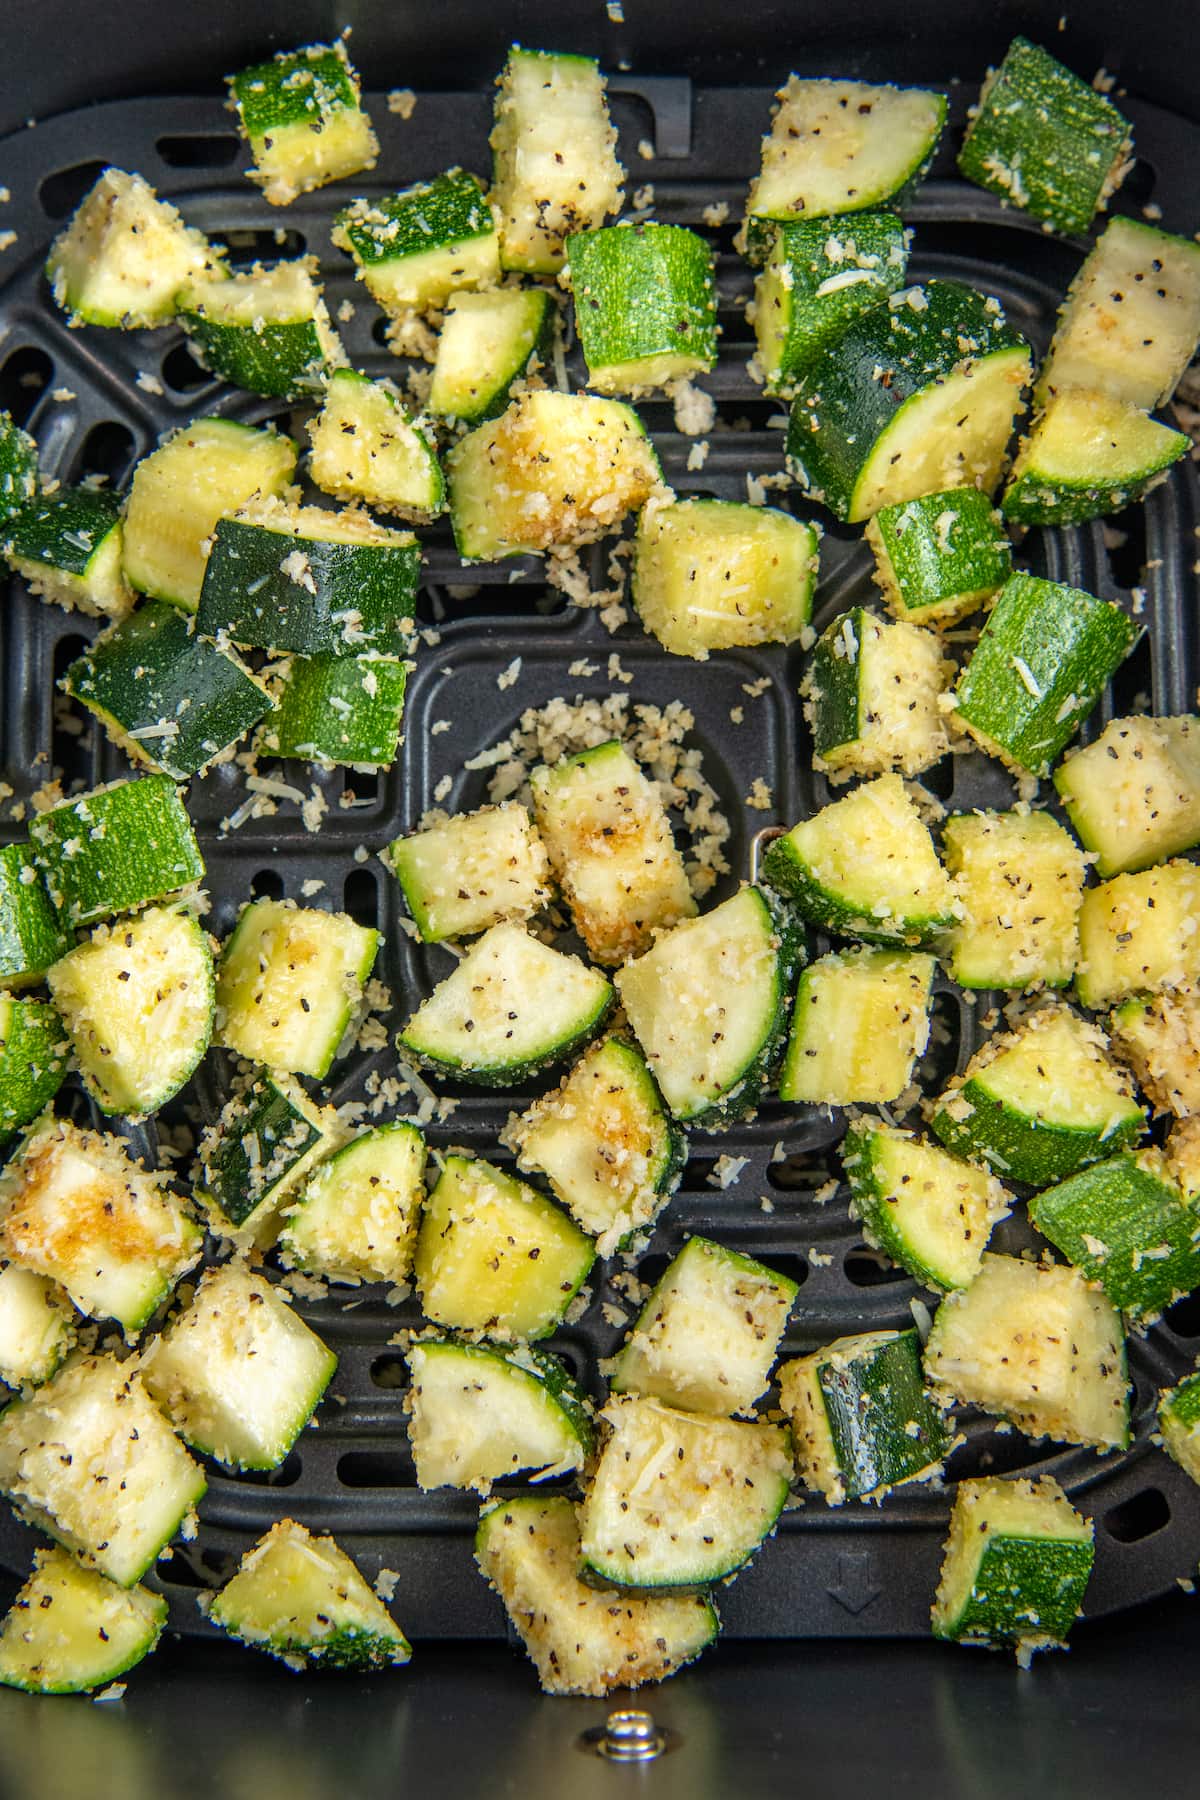 Uncooked zucchini coated in seasonings, cheese and bread crumbs in an air fryer basket.